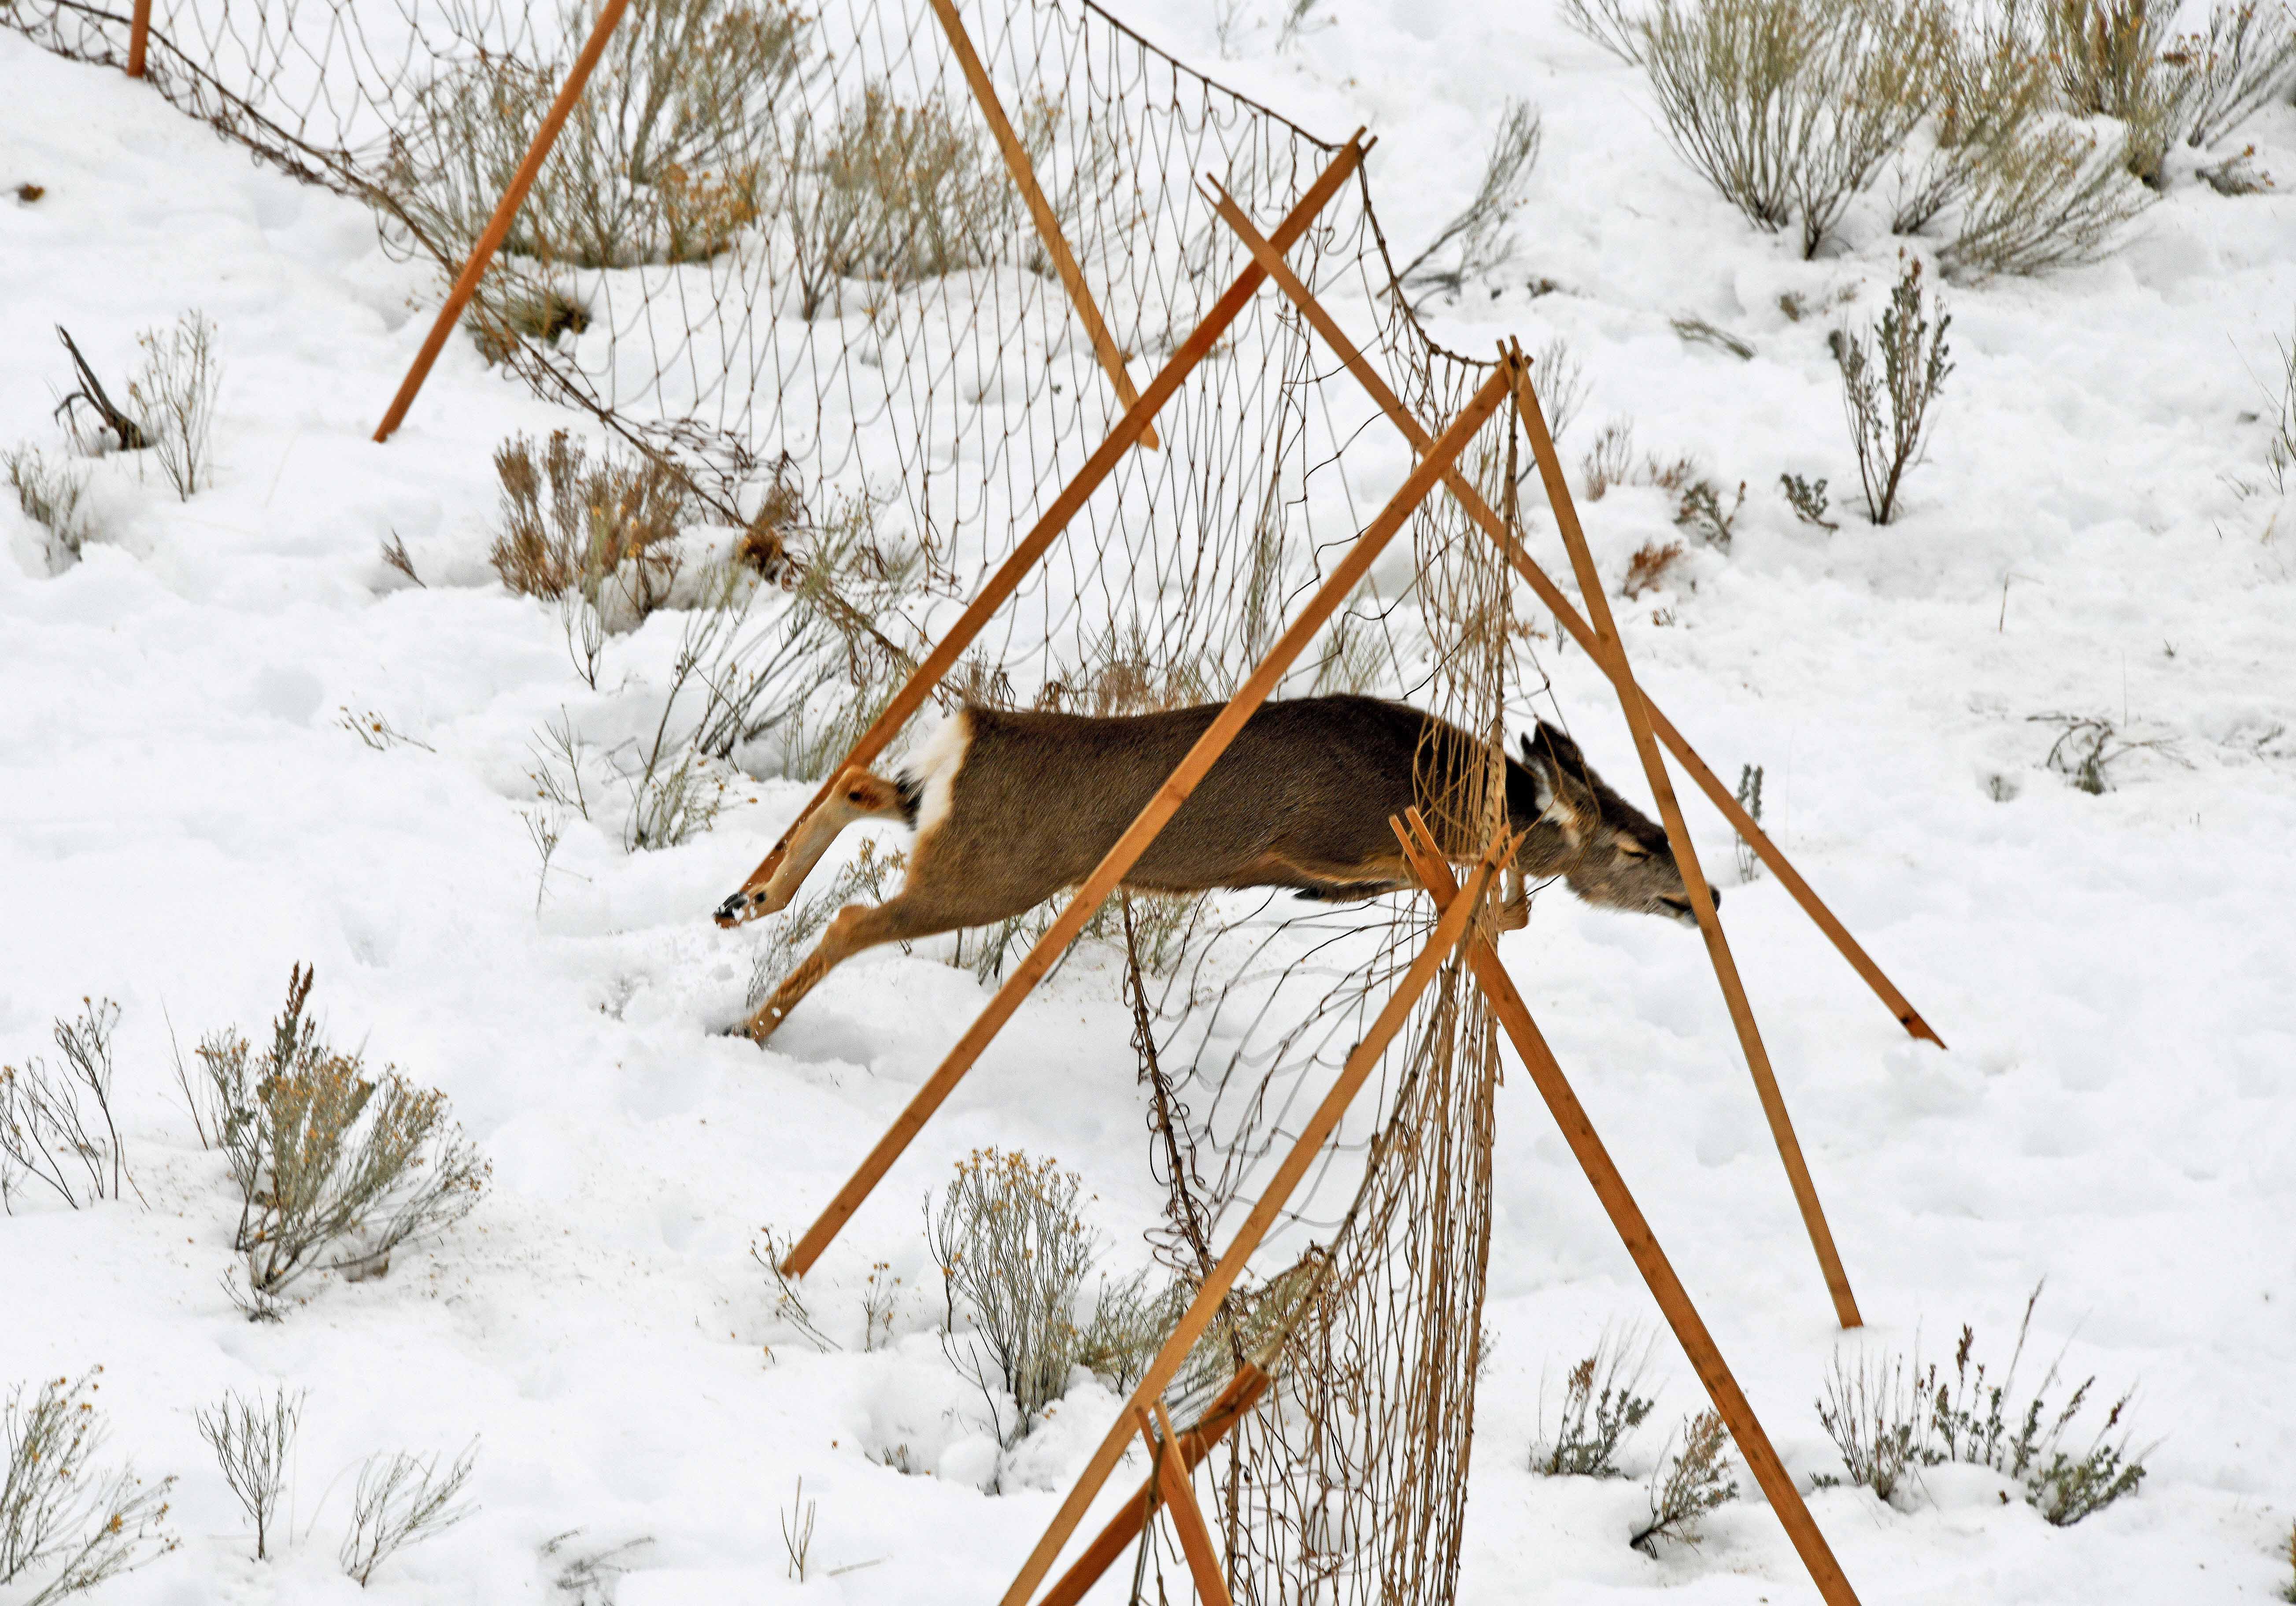 mule deer hits the drive net during winter capture operations in the Magic Valley Region